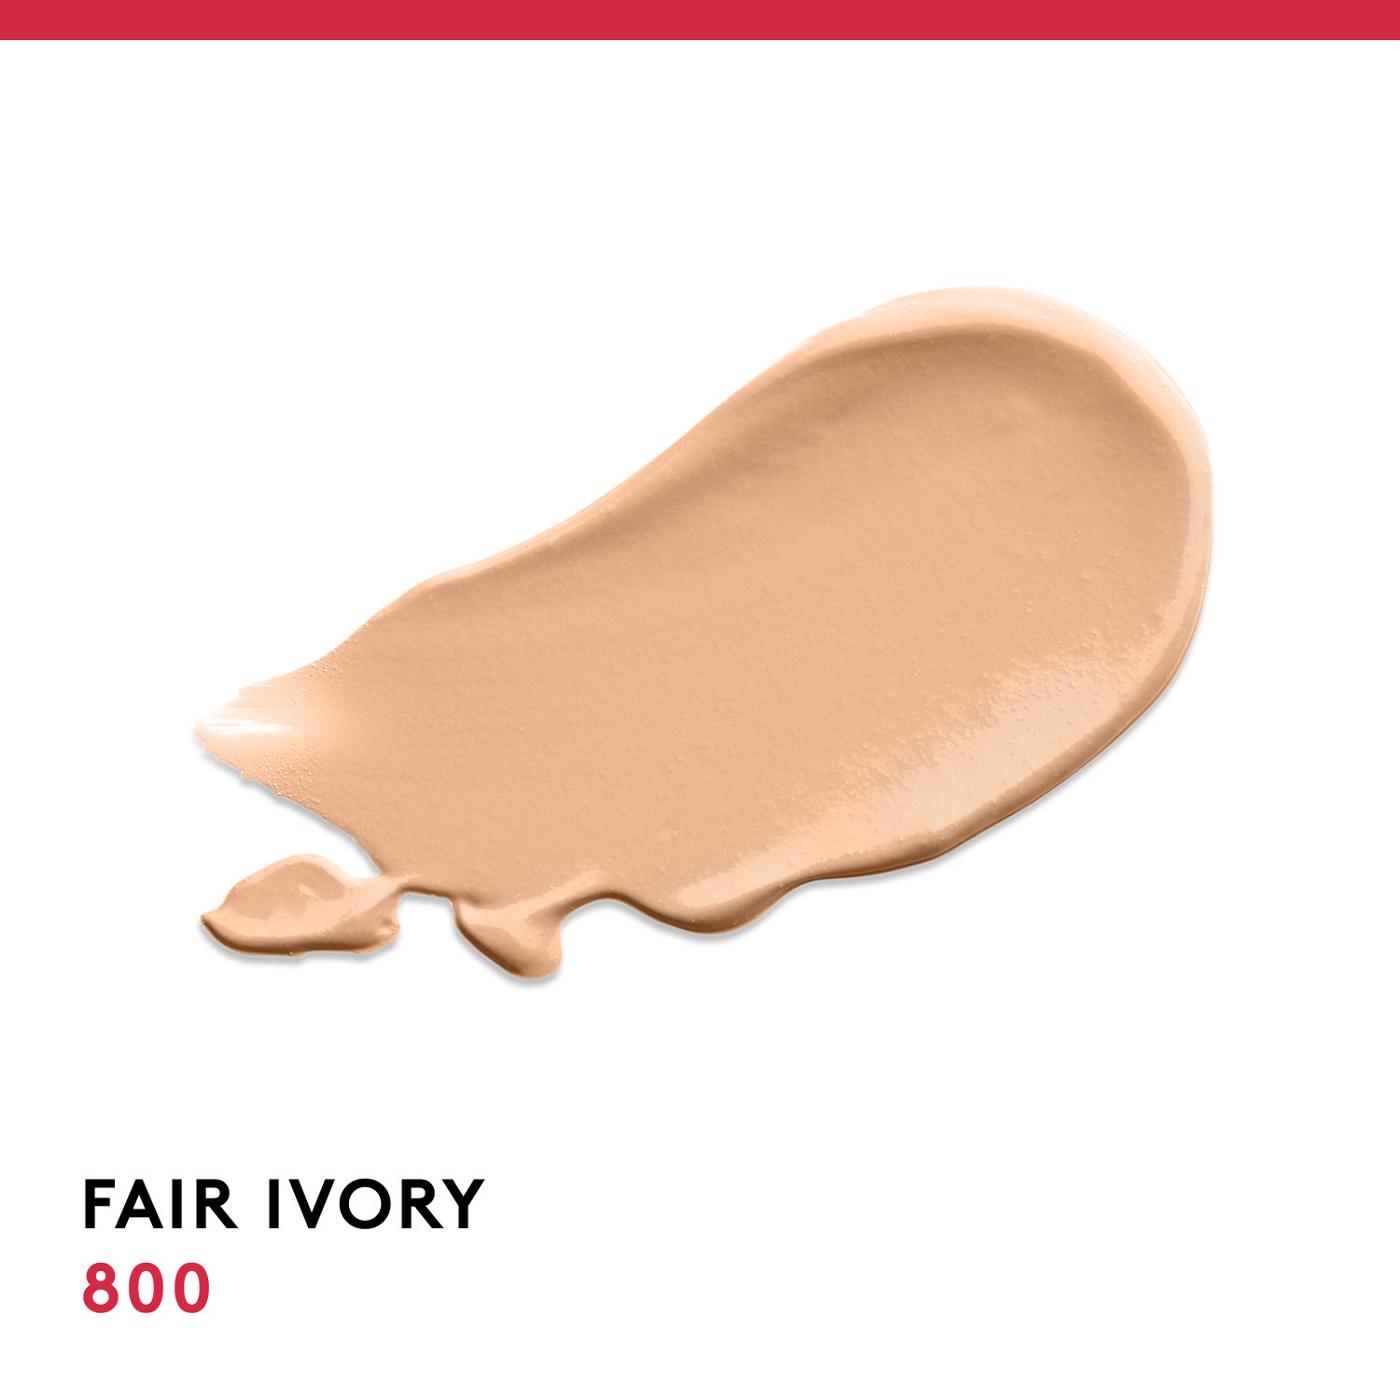 Covergirl Outlast Extreme Wear Liquid Foundation 800 Fair Ivory; image 3 of 11